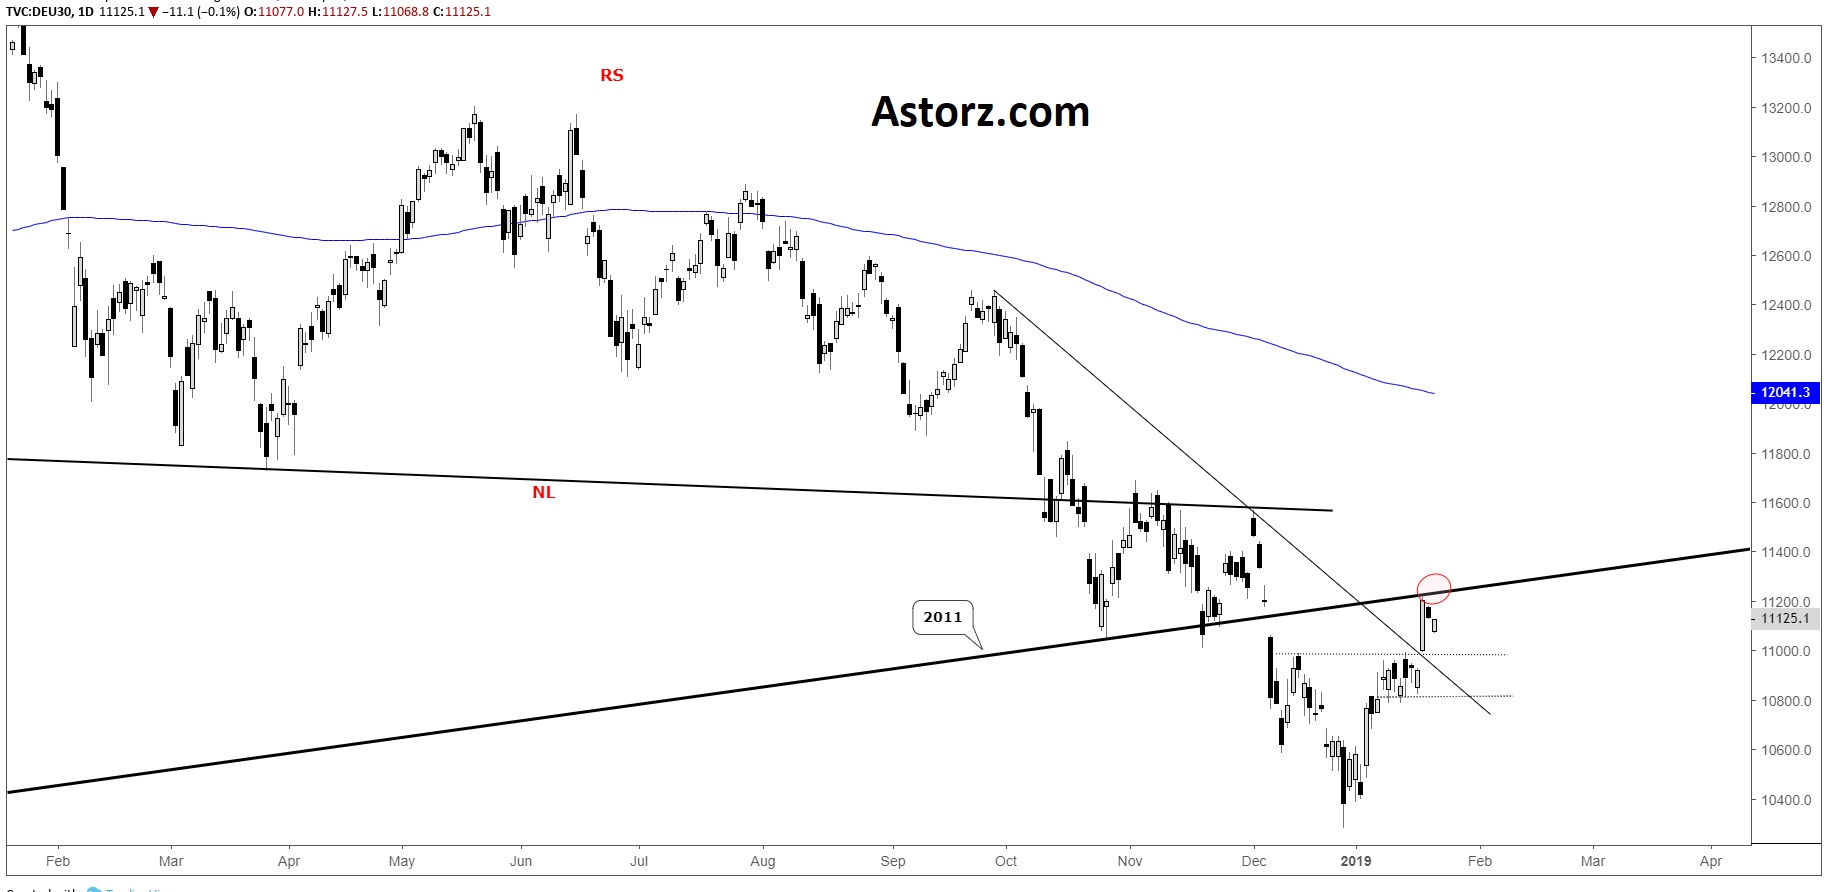 Astorz Trading DAX30 & CAC40 Technical Analysis